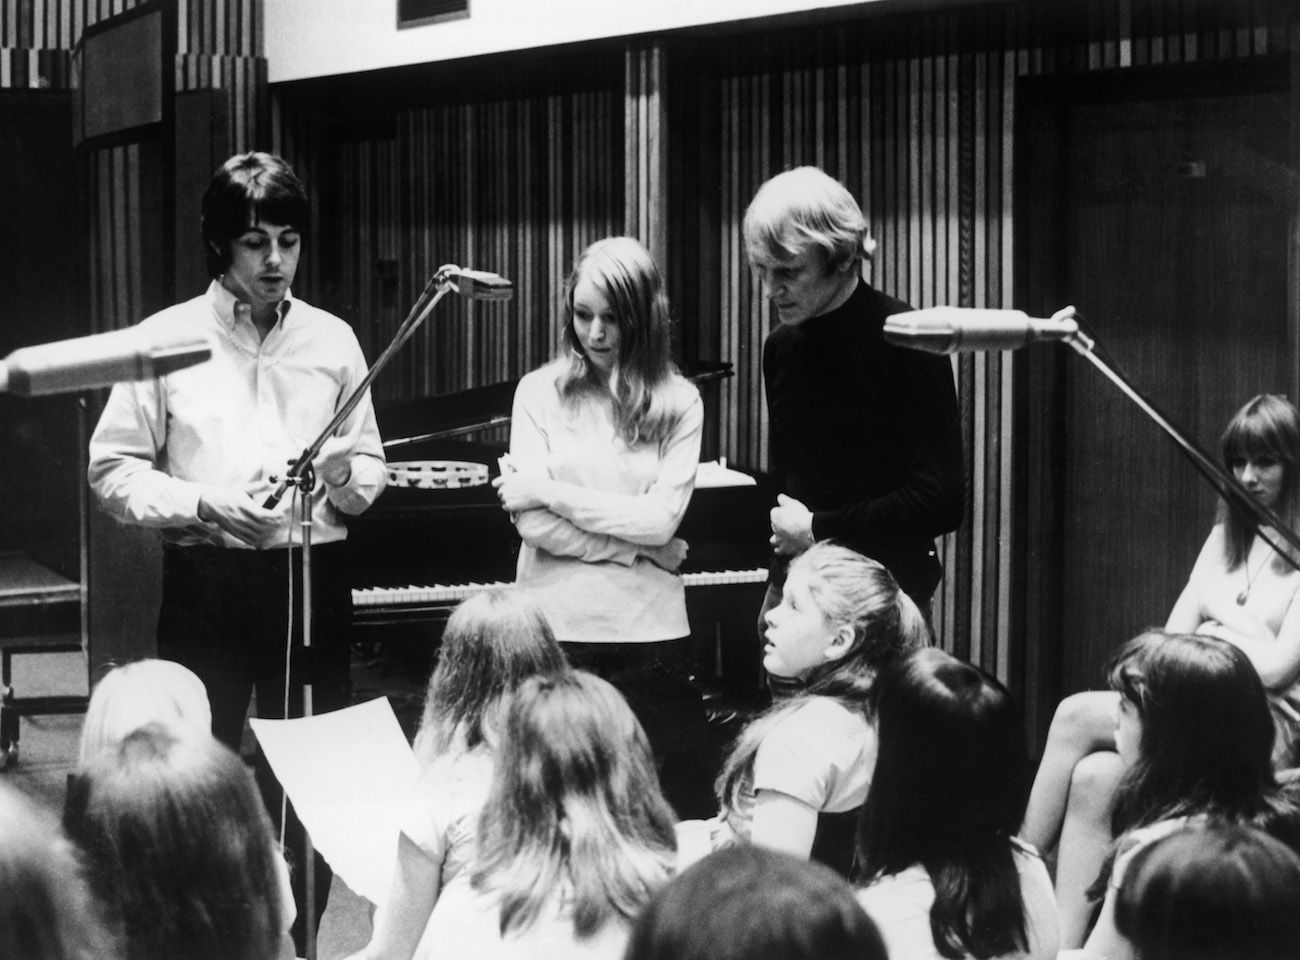 Paul McCartney and Mary Hopkin in the recording studio in 1968.